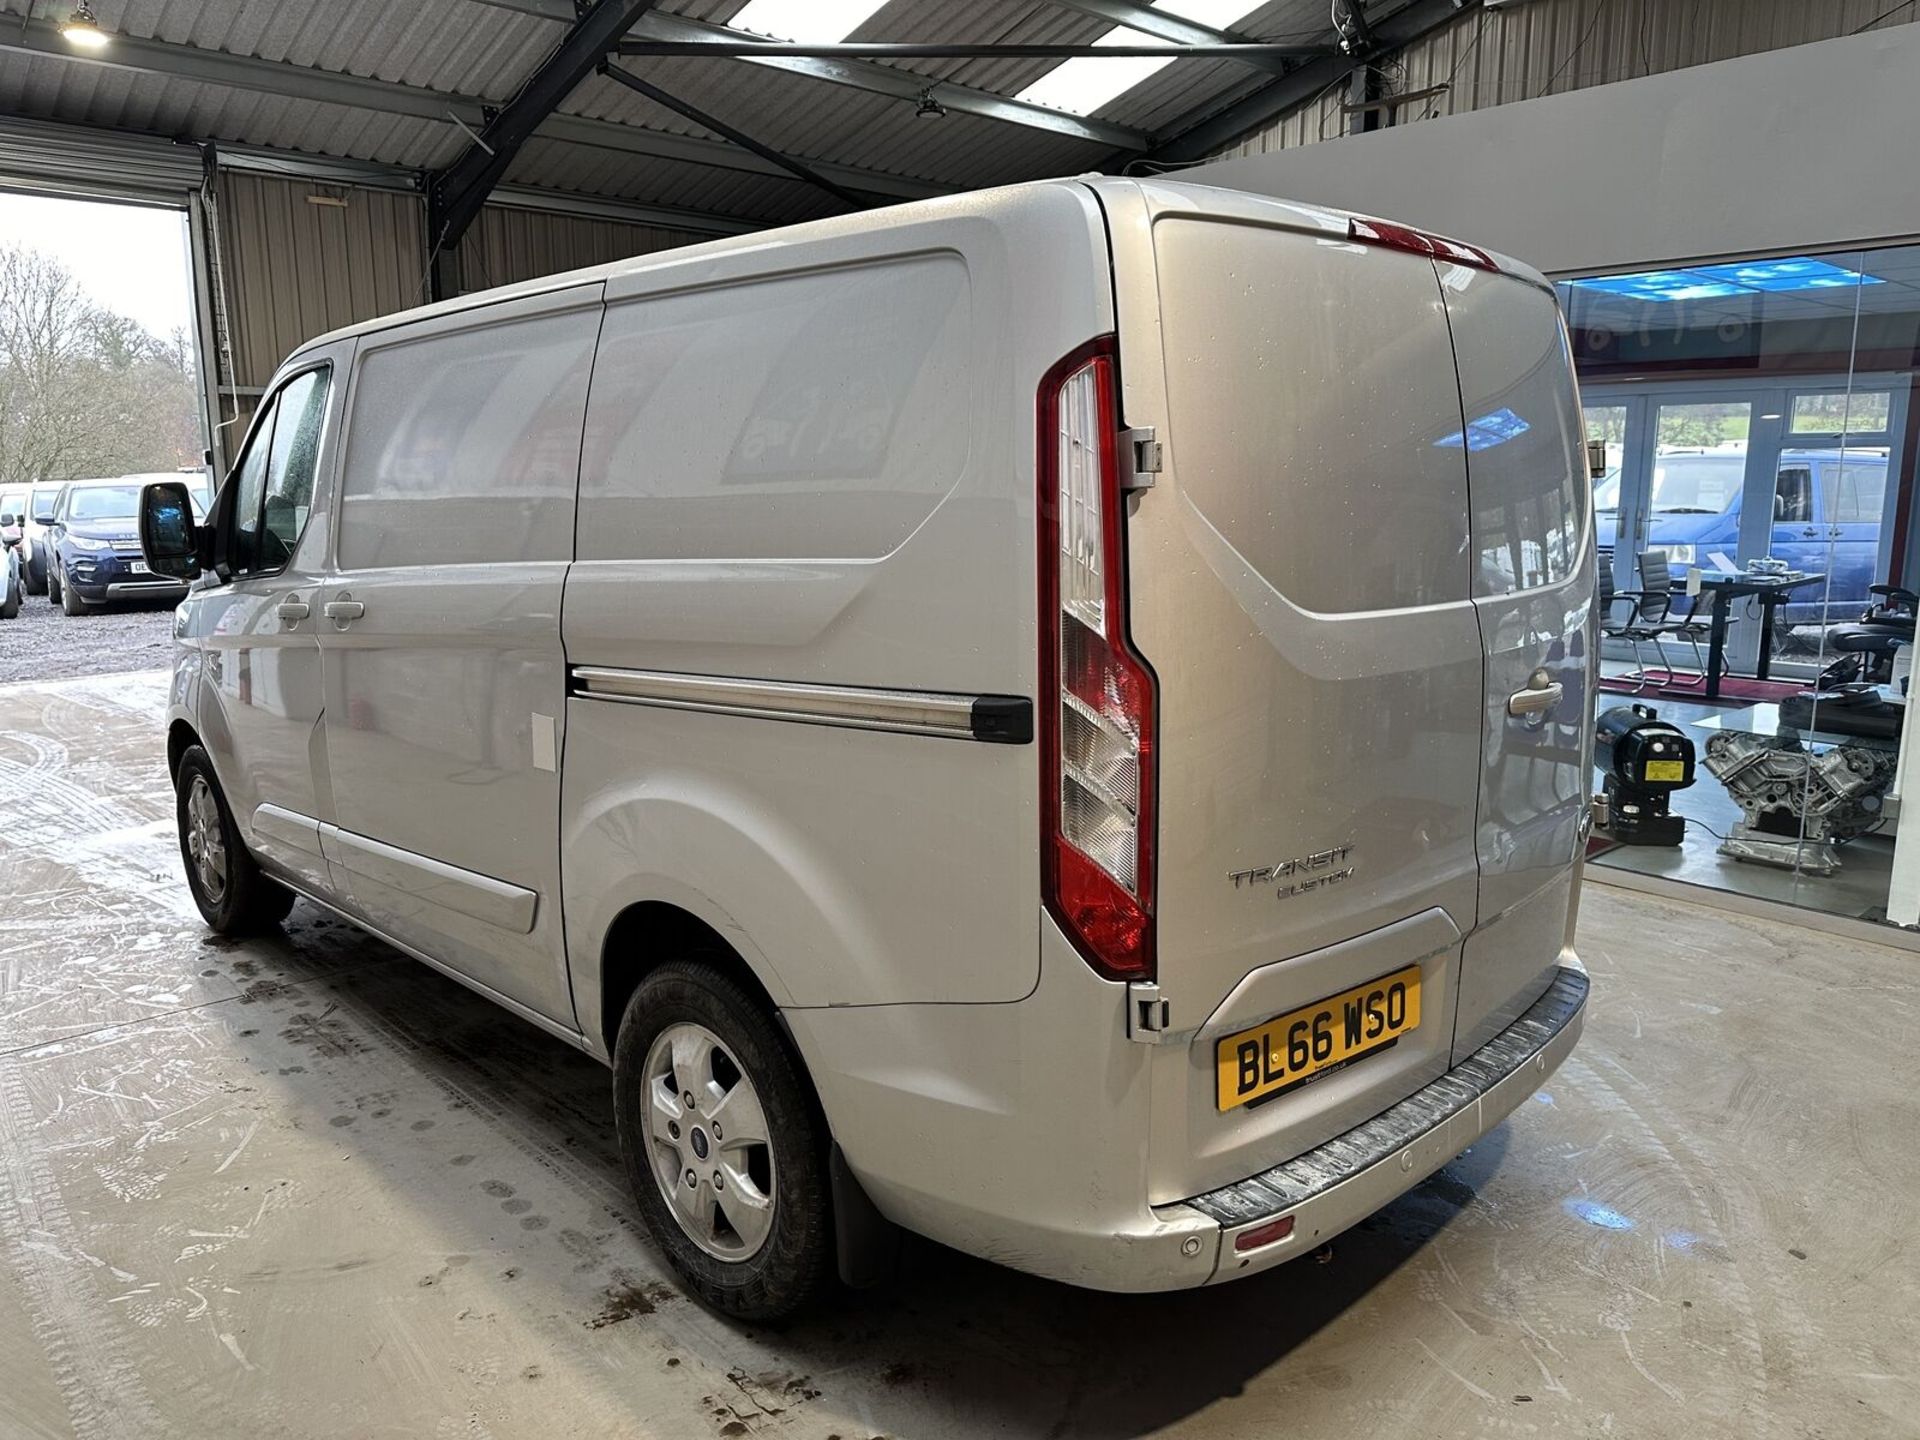 SILVER STUNNER: 2016 TRANSIT CUSTOM 2.0 TDCI 130PS, LIMITED EDITION - Image 11 of 12